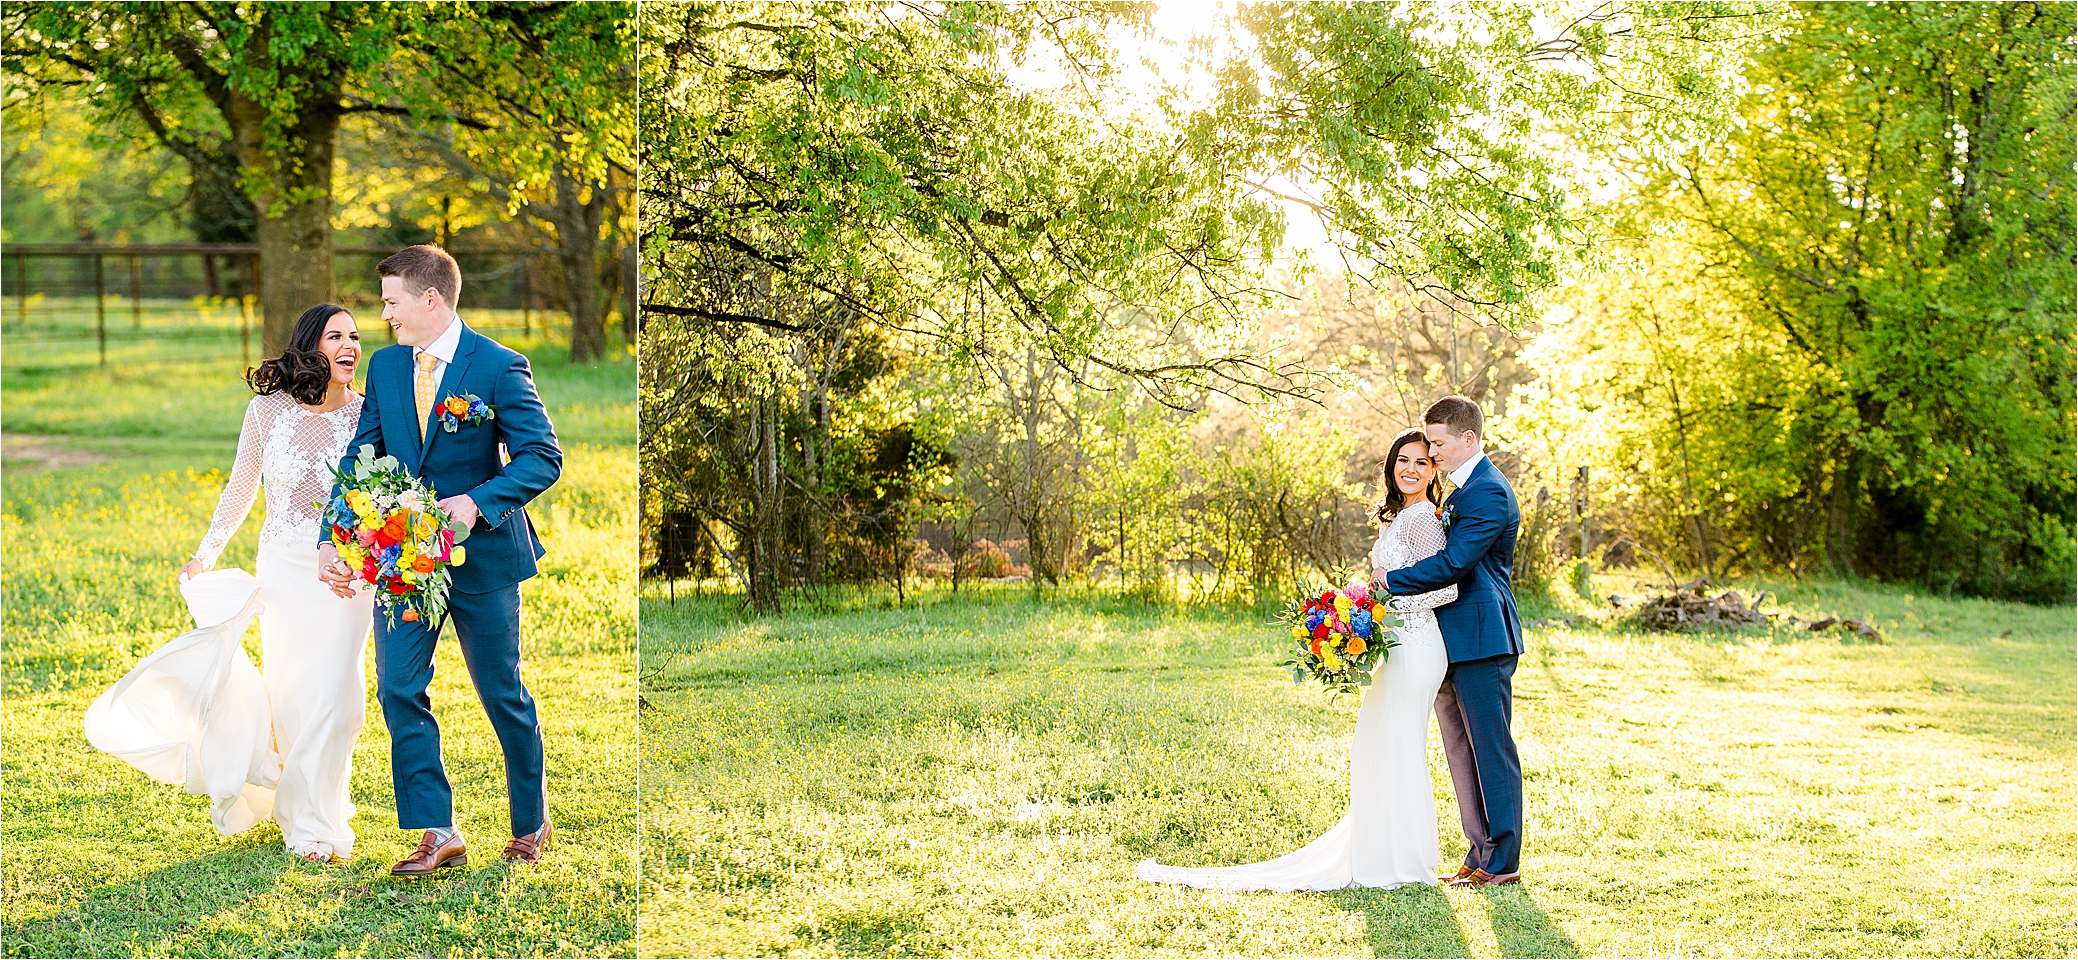 A couple joyfully runs through a field together on their wedding day at Pineway Farms during their portraits with Hill Country Wedding Photographer Jillian Hogan 